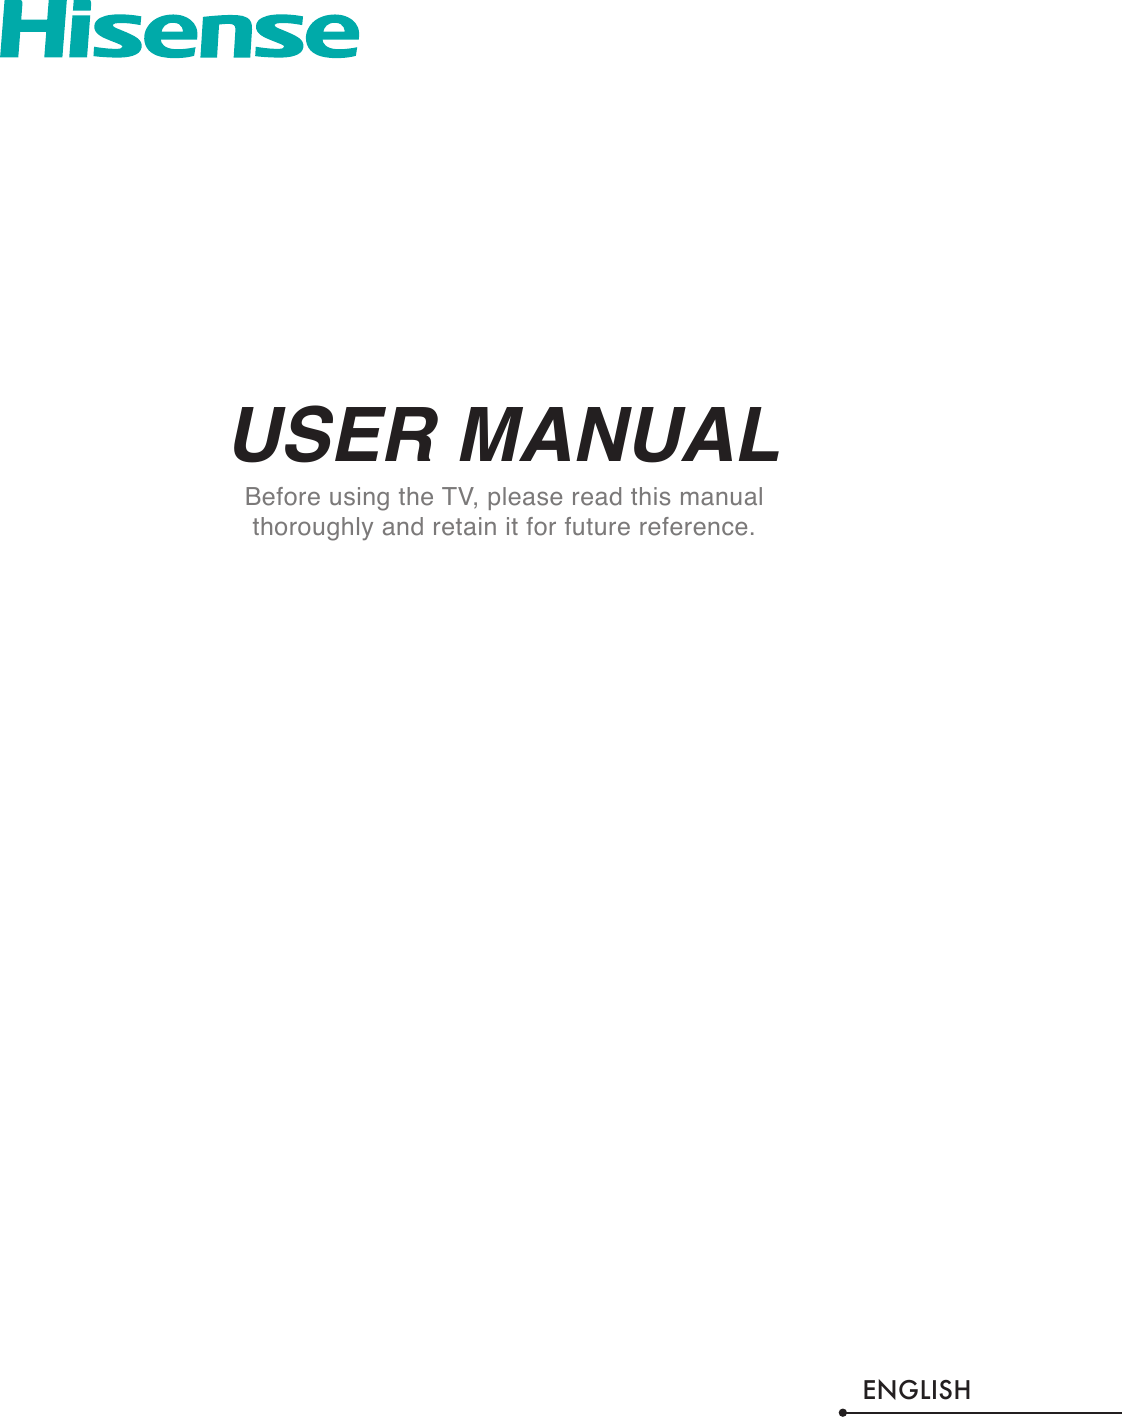 USER MANUALBefore using the TV, please read this manual thoroughly and retain it for future reference.ENGLISH